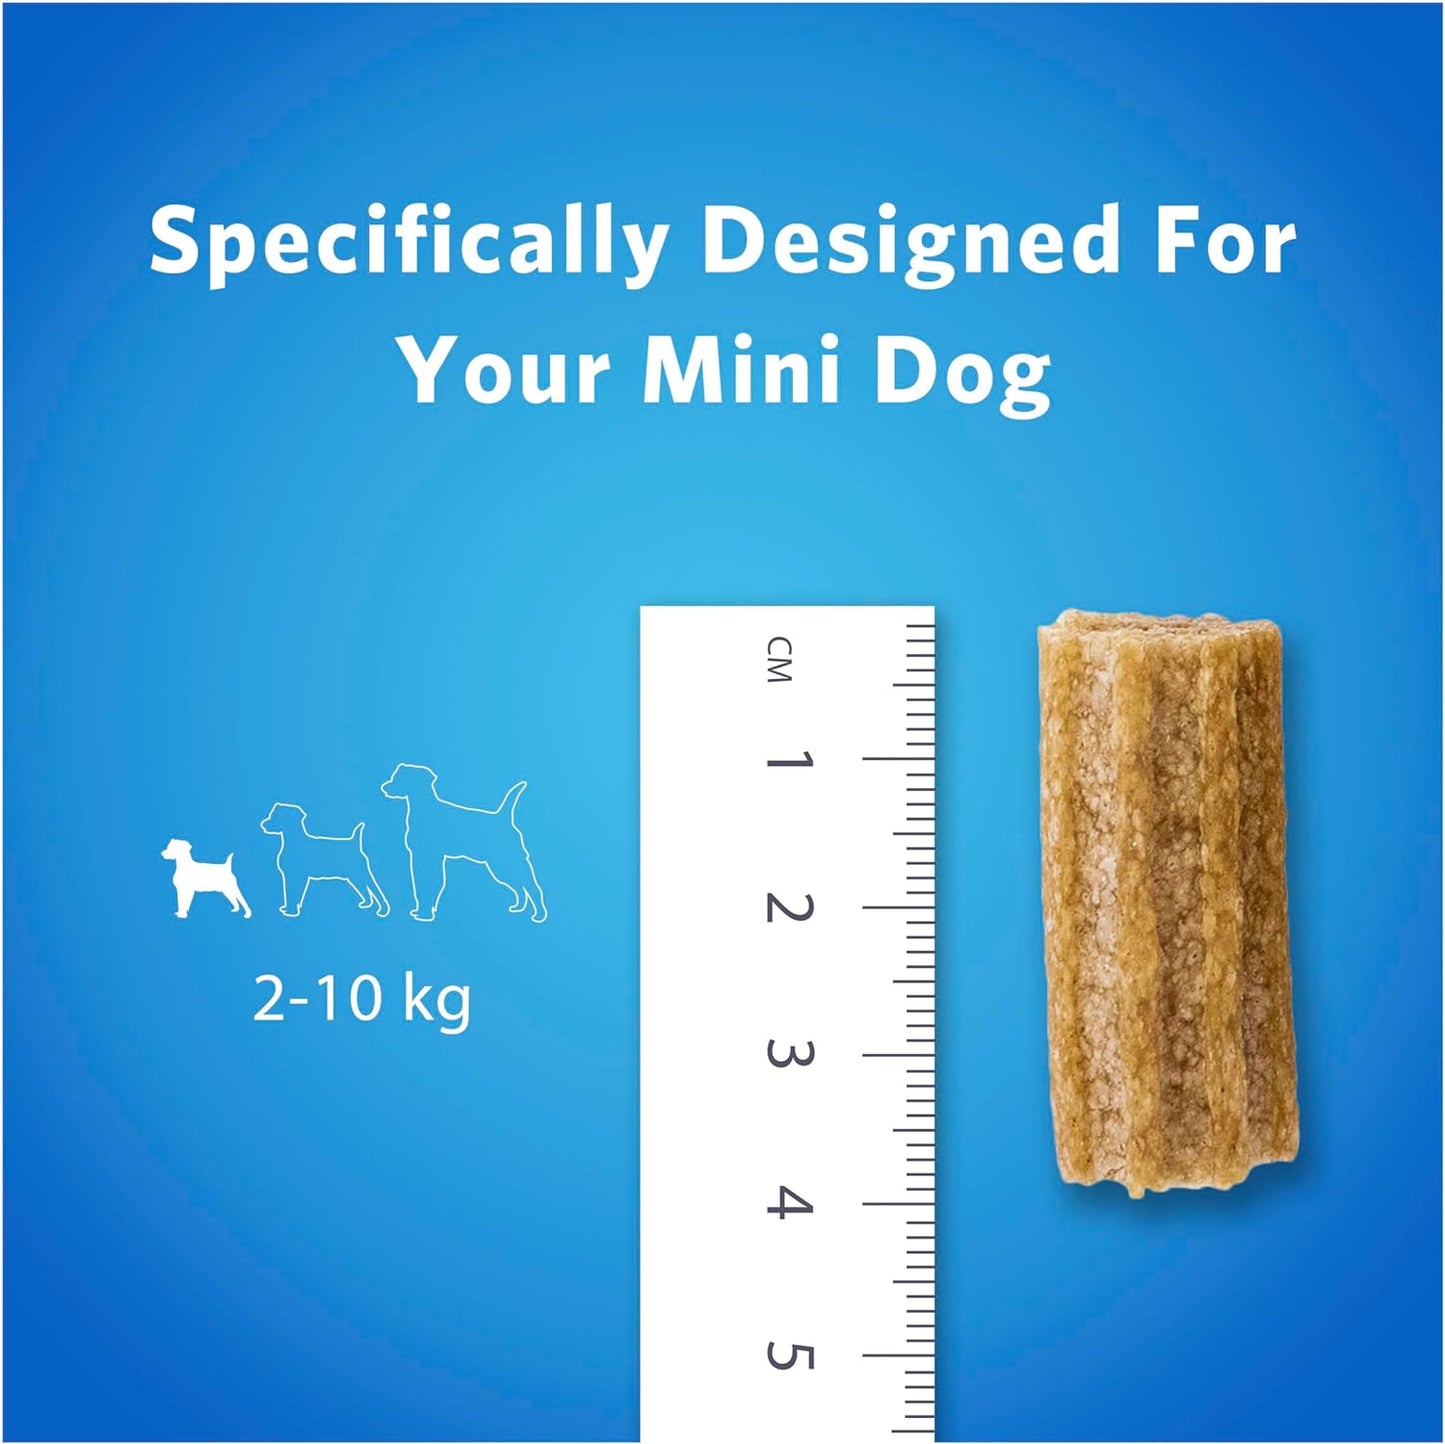 Uniites™ Dentalife DentaLife Made in USA Facilities Toy Breed Dog Dental Chews, Daily Mini - 58 ct. Pouch $9.91